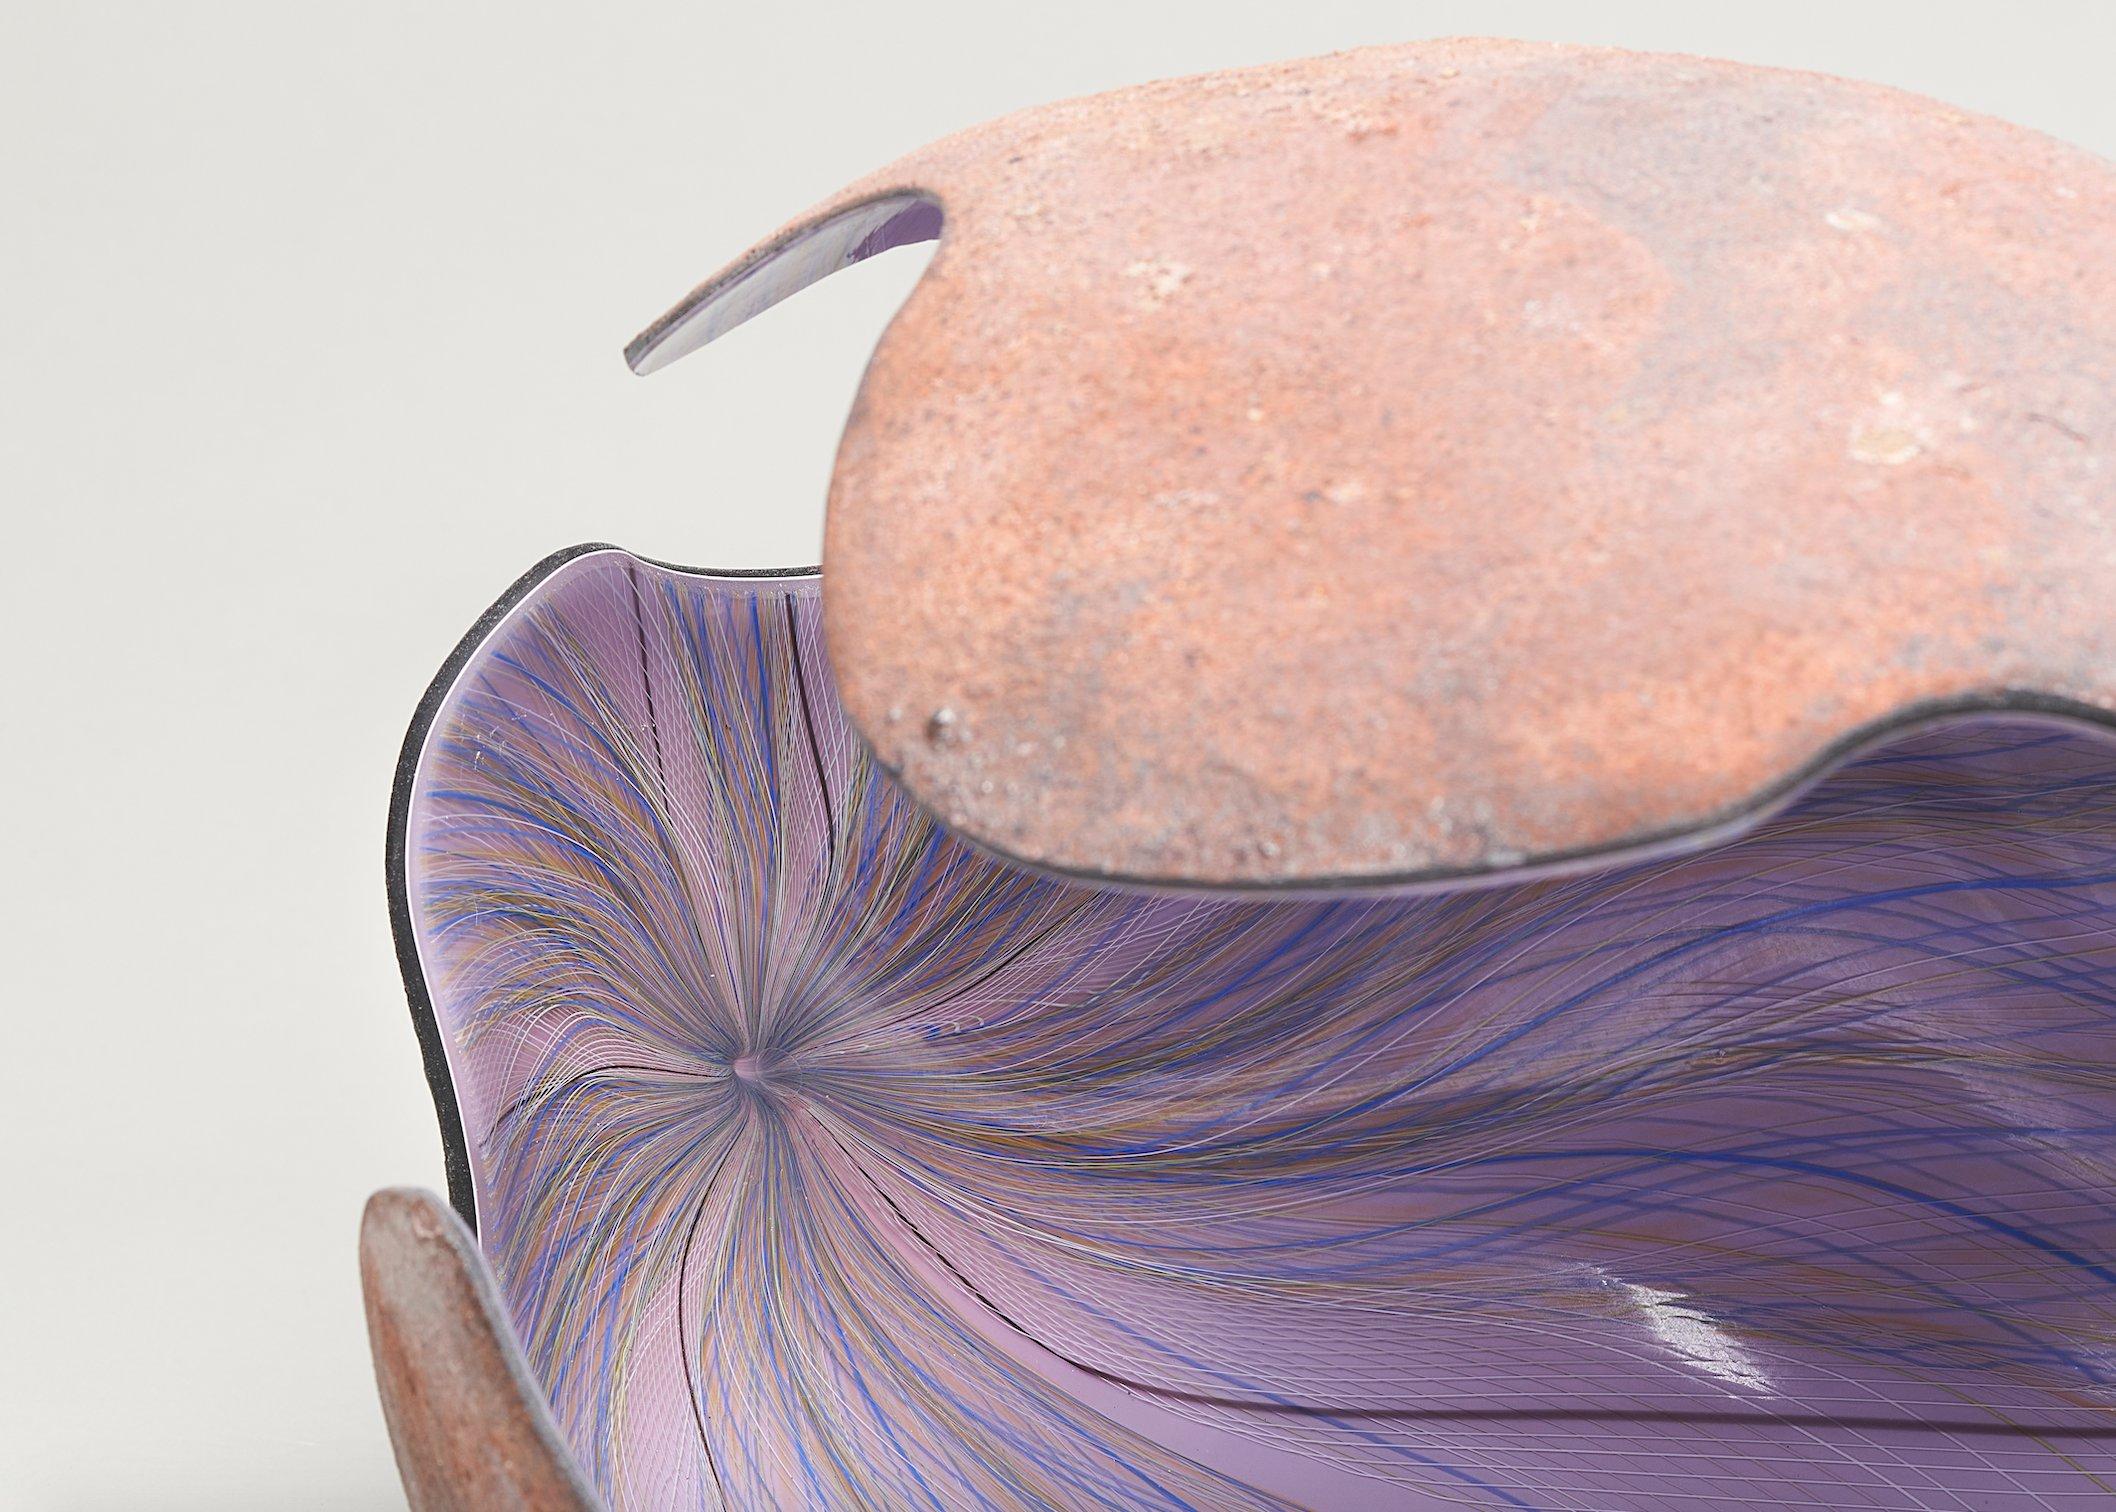 Wave Royal Purple, 2022 (Glass, C. 13 in. h x 18.5 in. w x 14.2 in. d, Object No.: 4000)

Geir Nustad’s work is often inspired by his experience growing up in the contrasting  natural surroundings of Norway. Between Norway’s wintry polar nights and